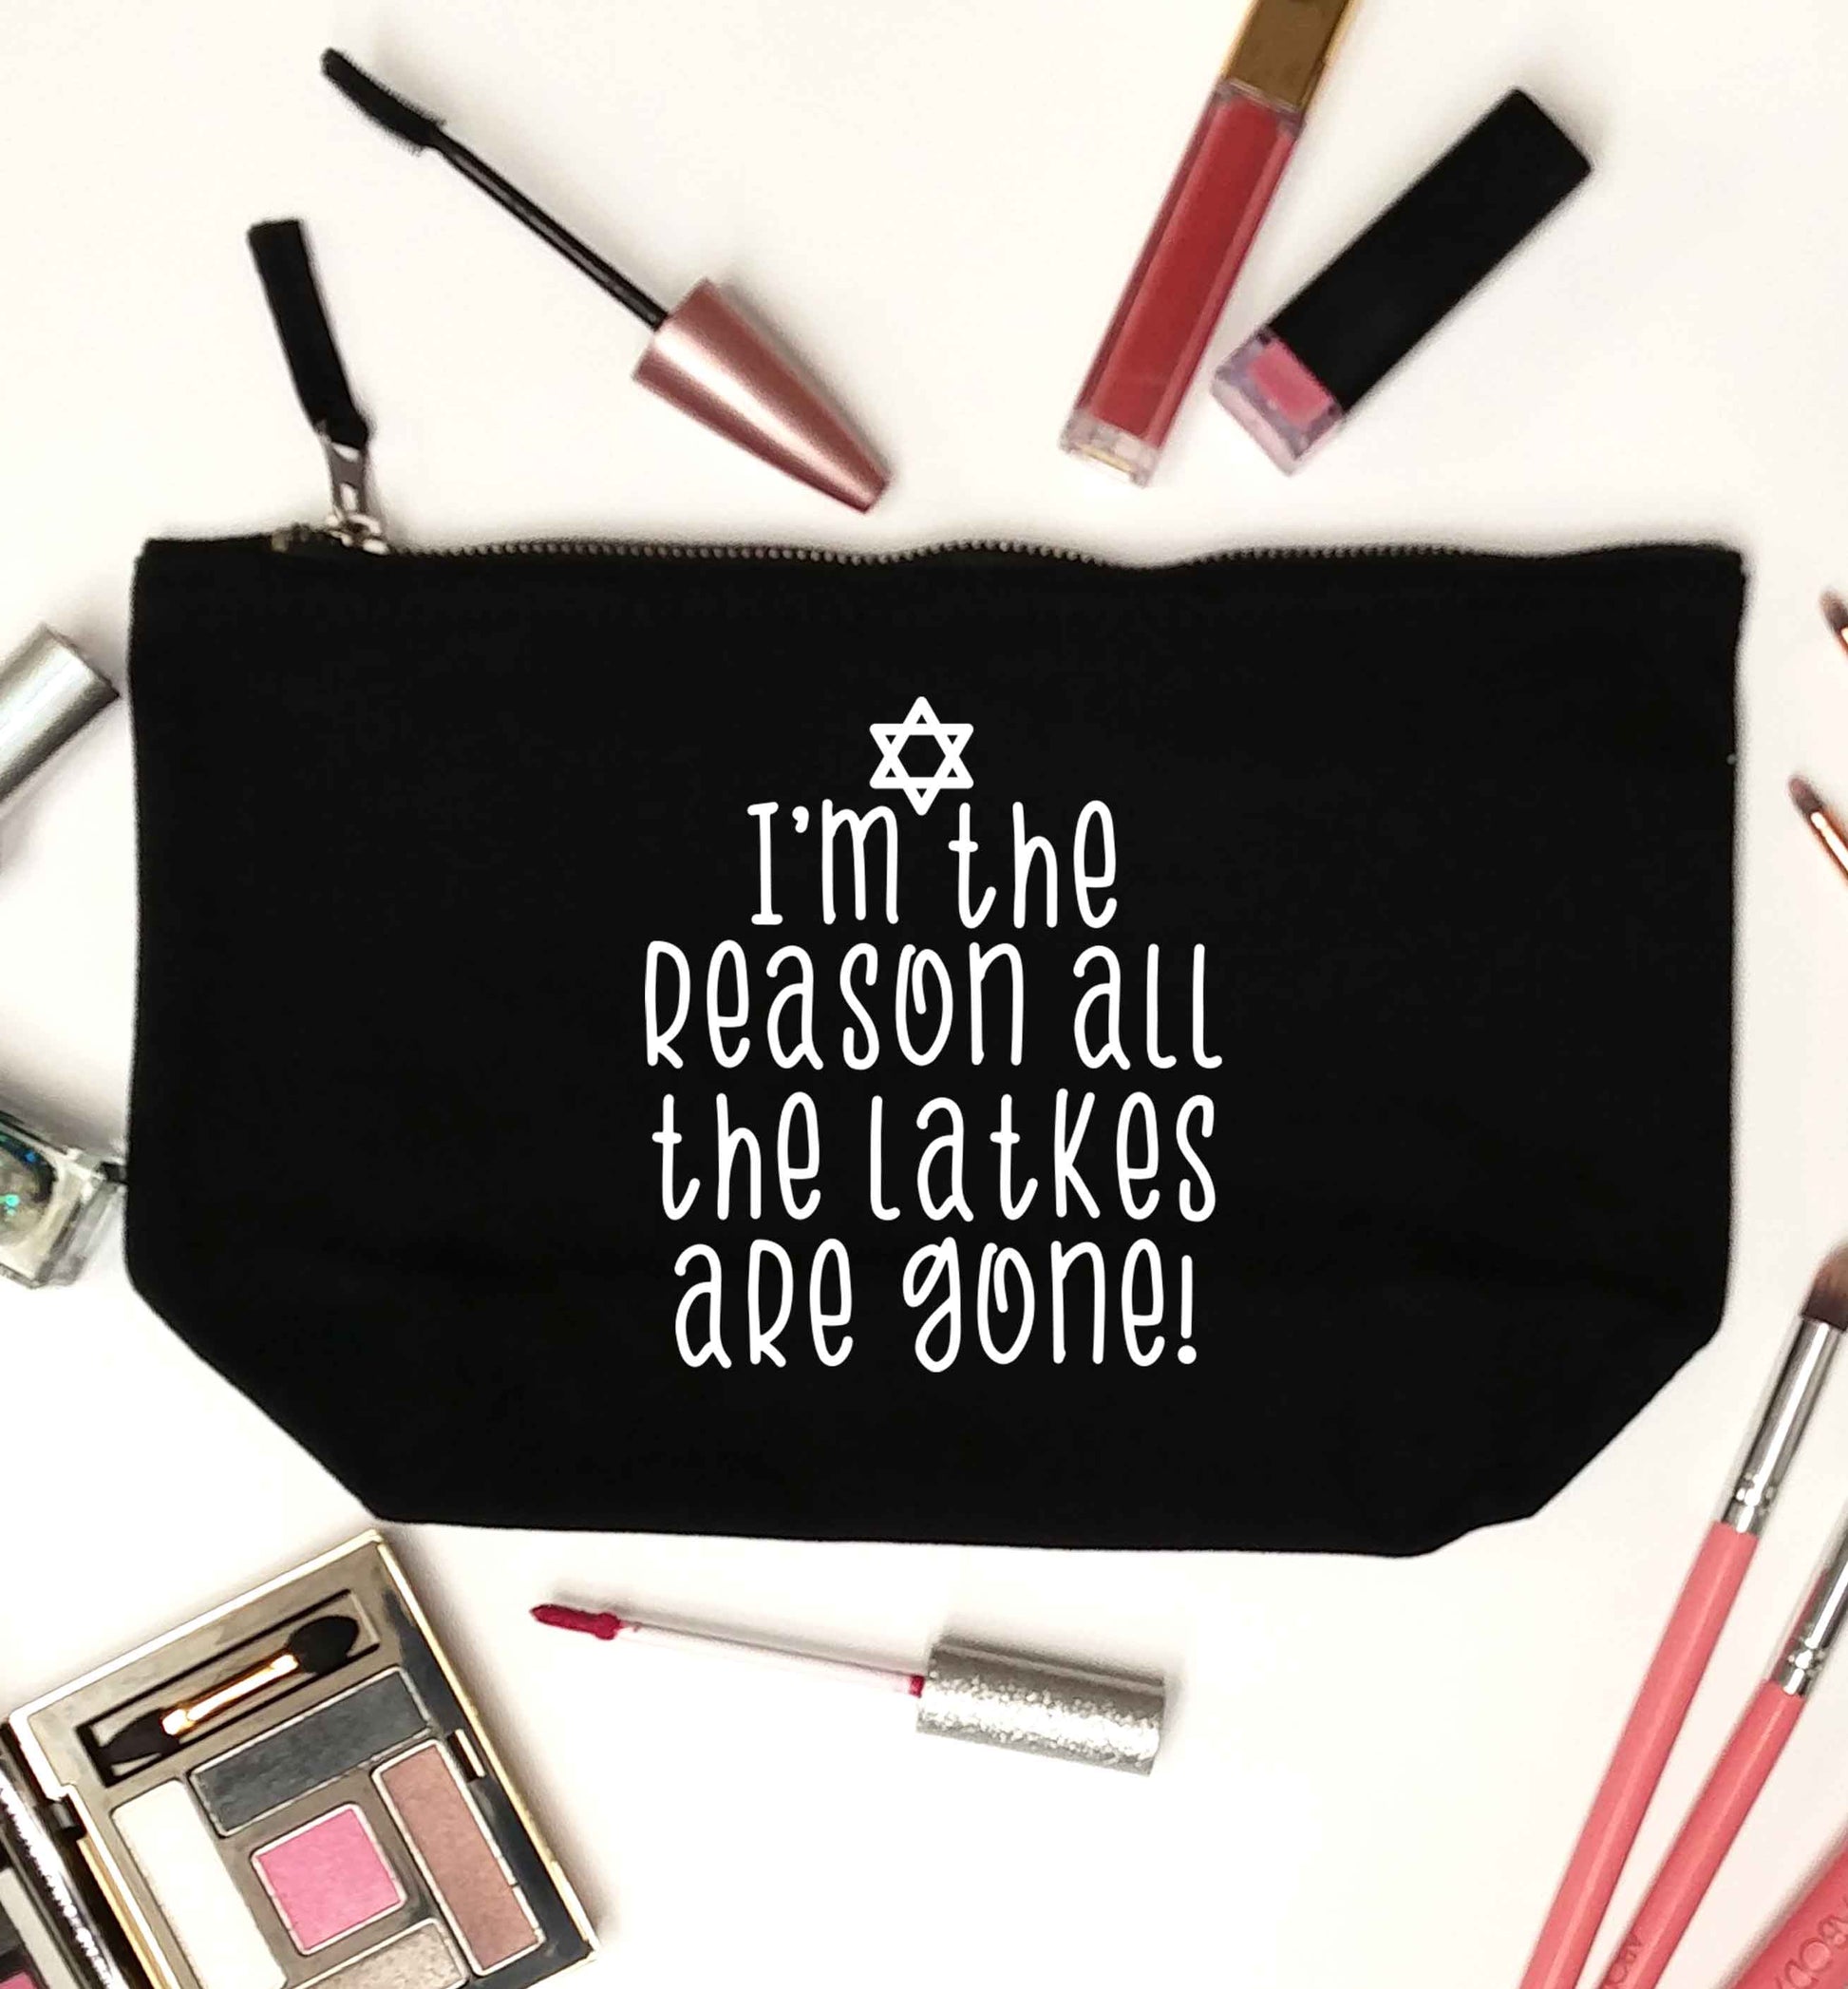 I'm the reason all the latkes are gone black makeup bag